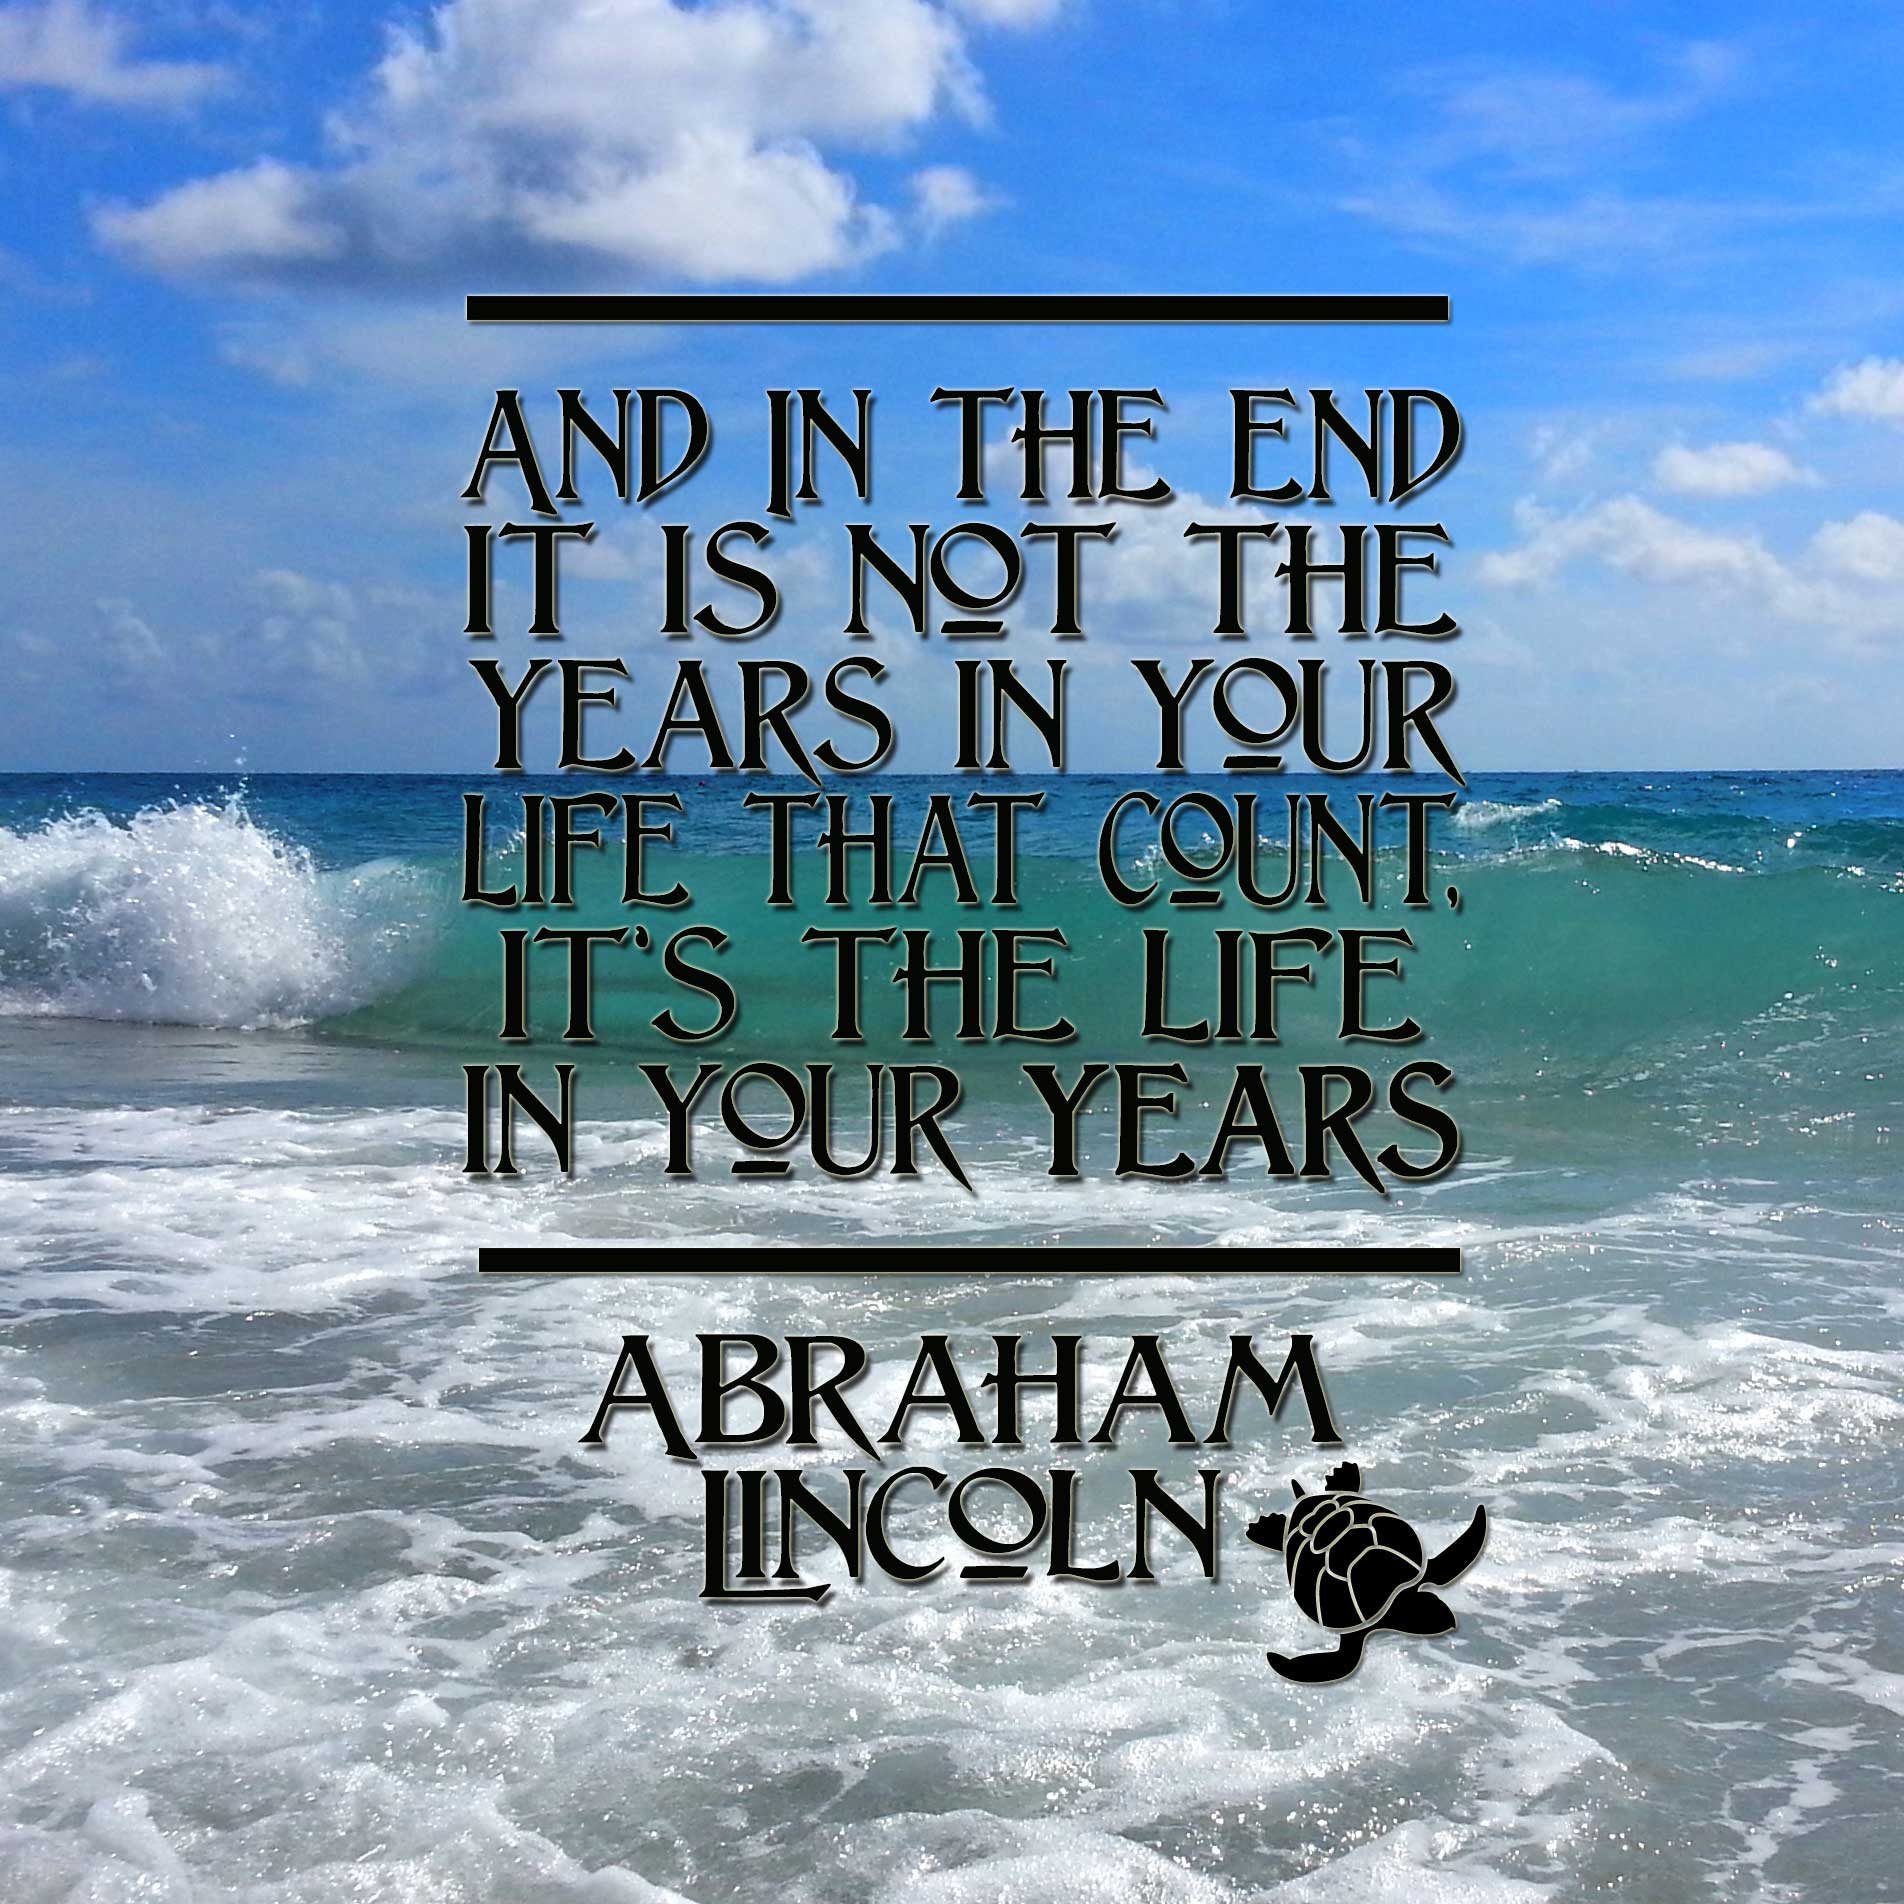 Abraham Lincoln Quotes - The Life in your Years